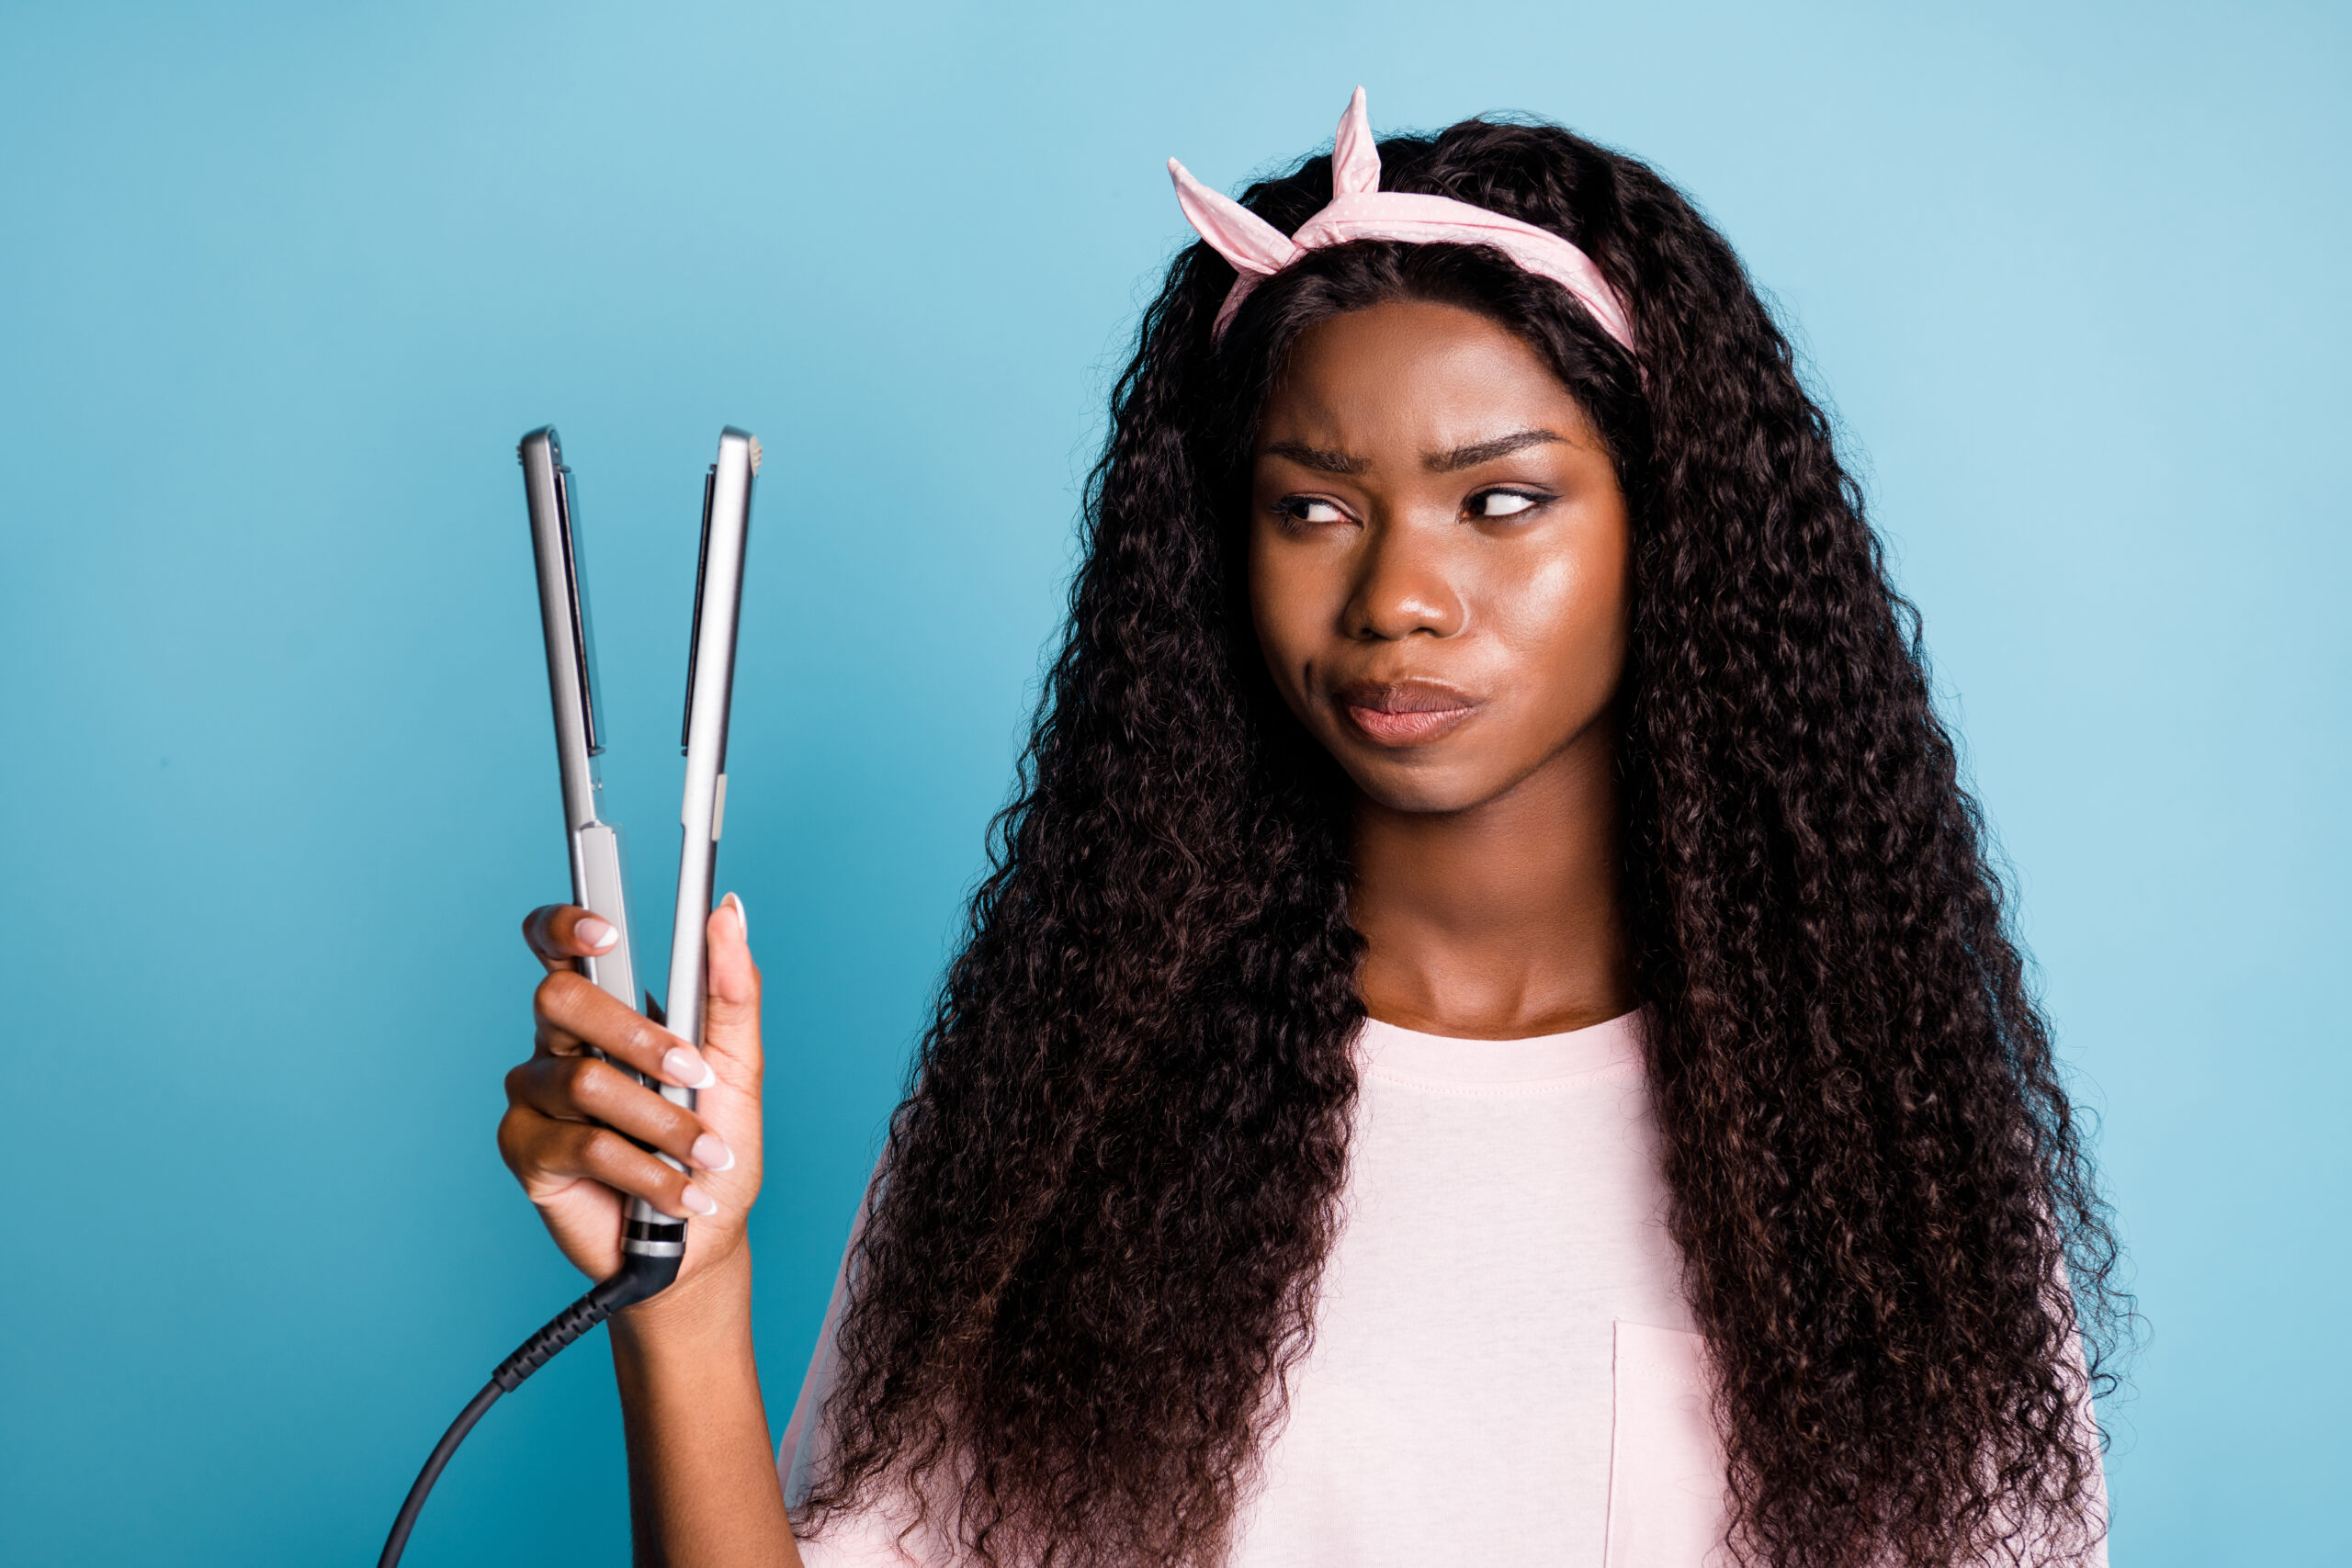 Is Your Hair Routine Causing You Harm?